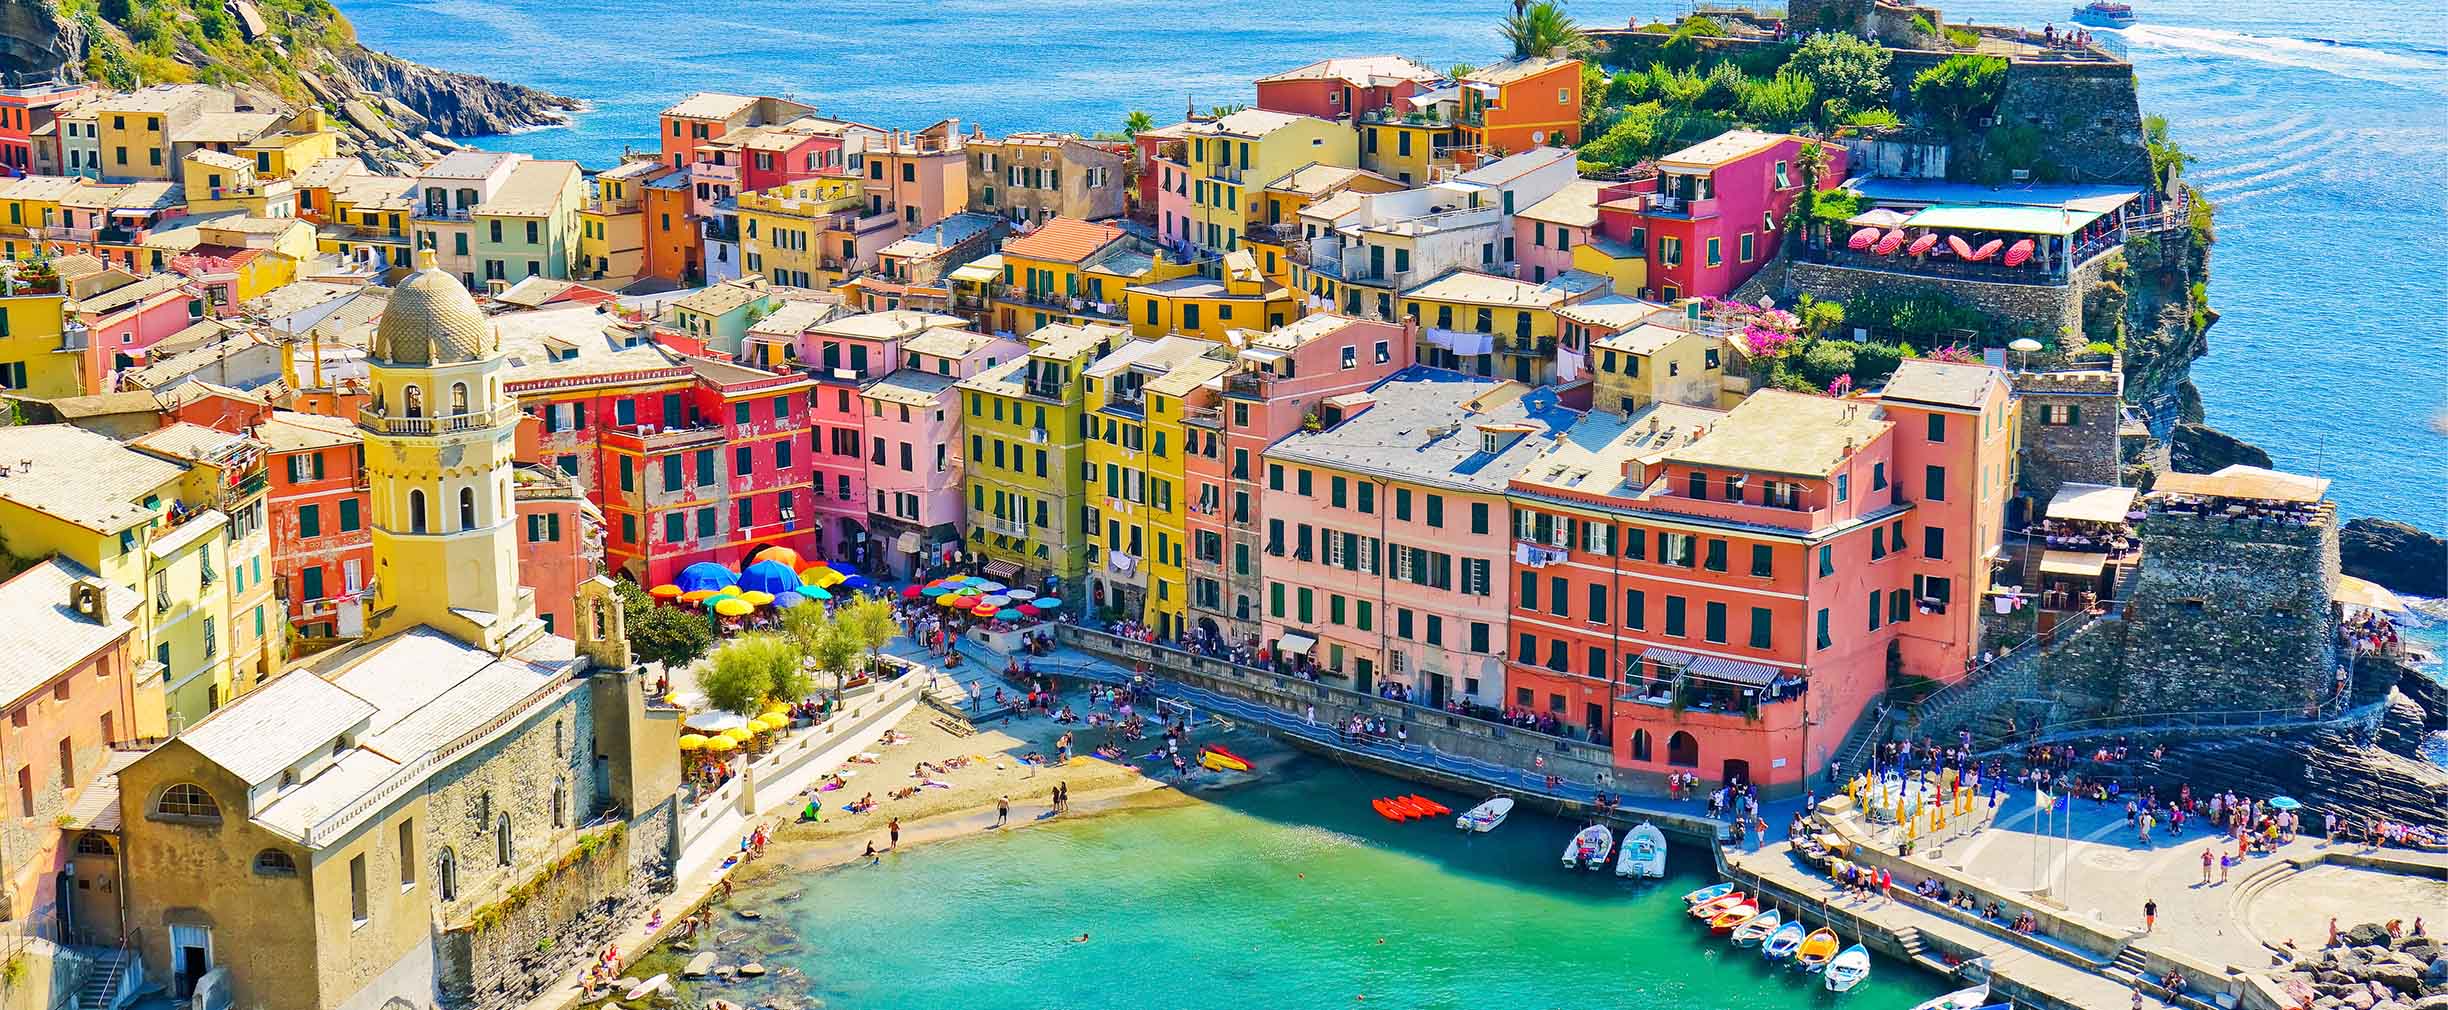 An aerial photo of the Italian seaside town of Cinque Terre complete with colorful houses and a harbor full of quaint fishing boats